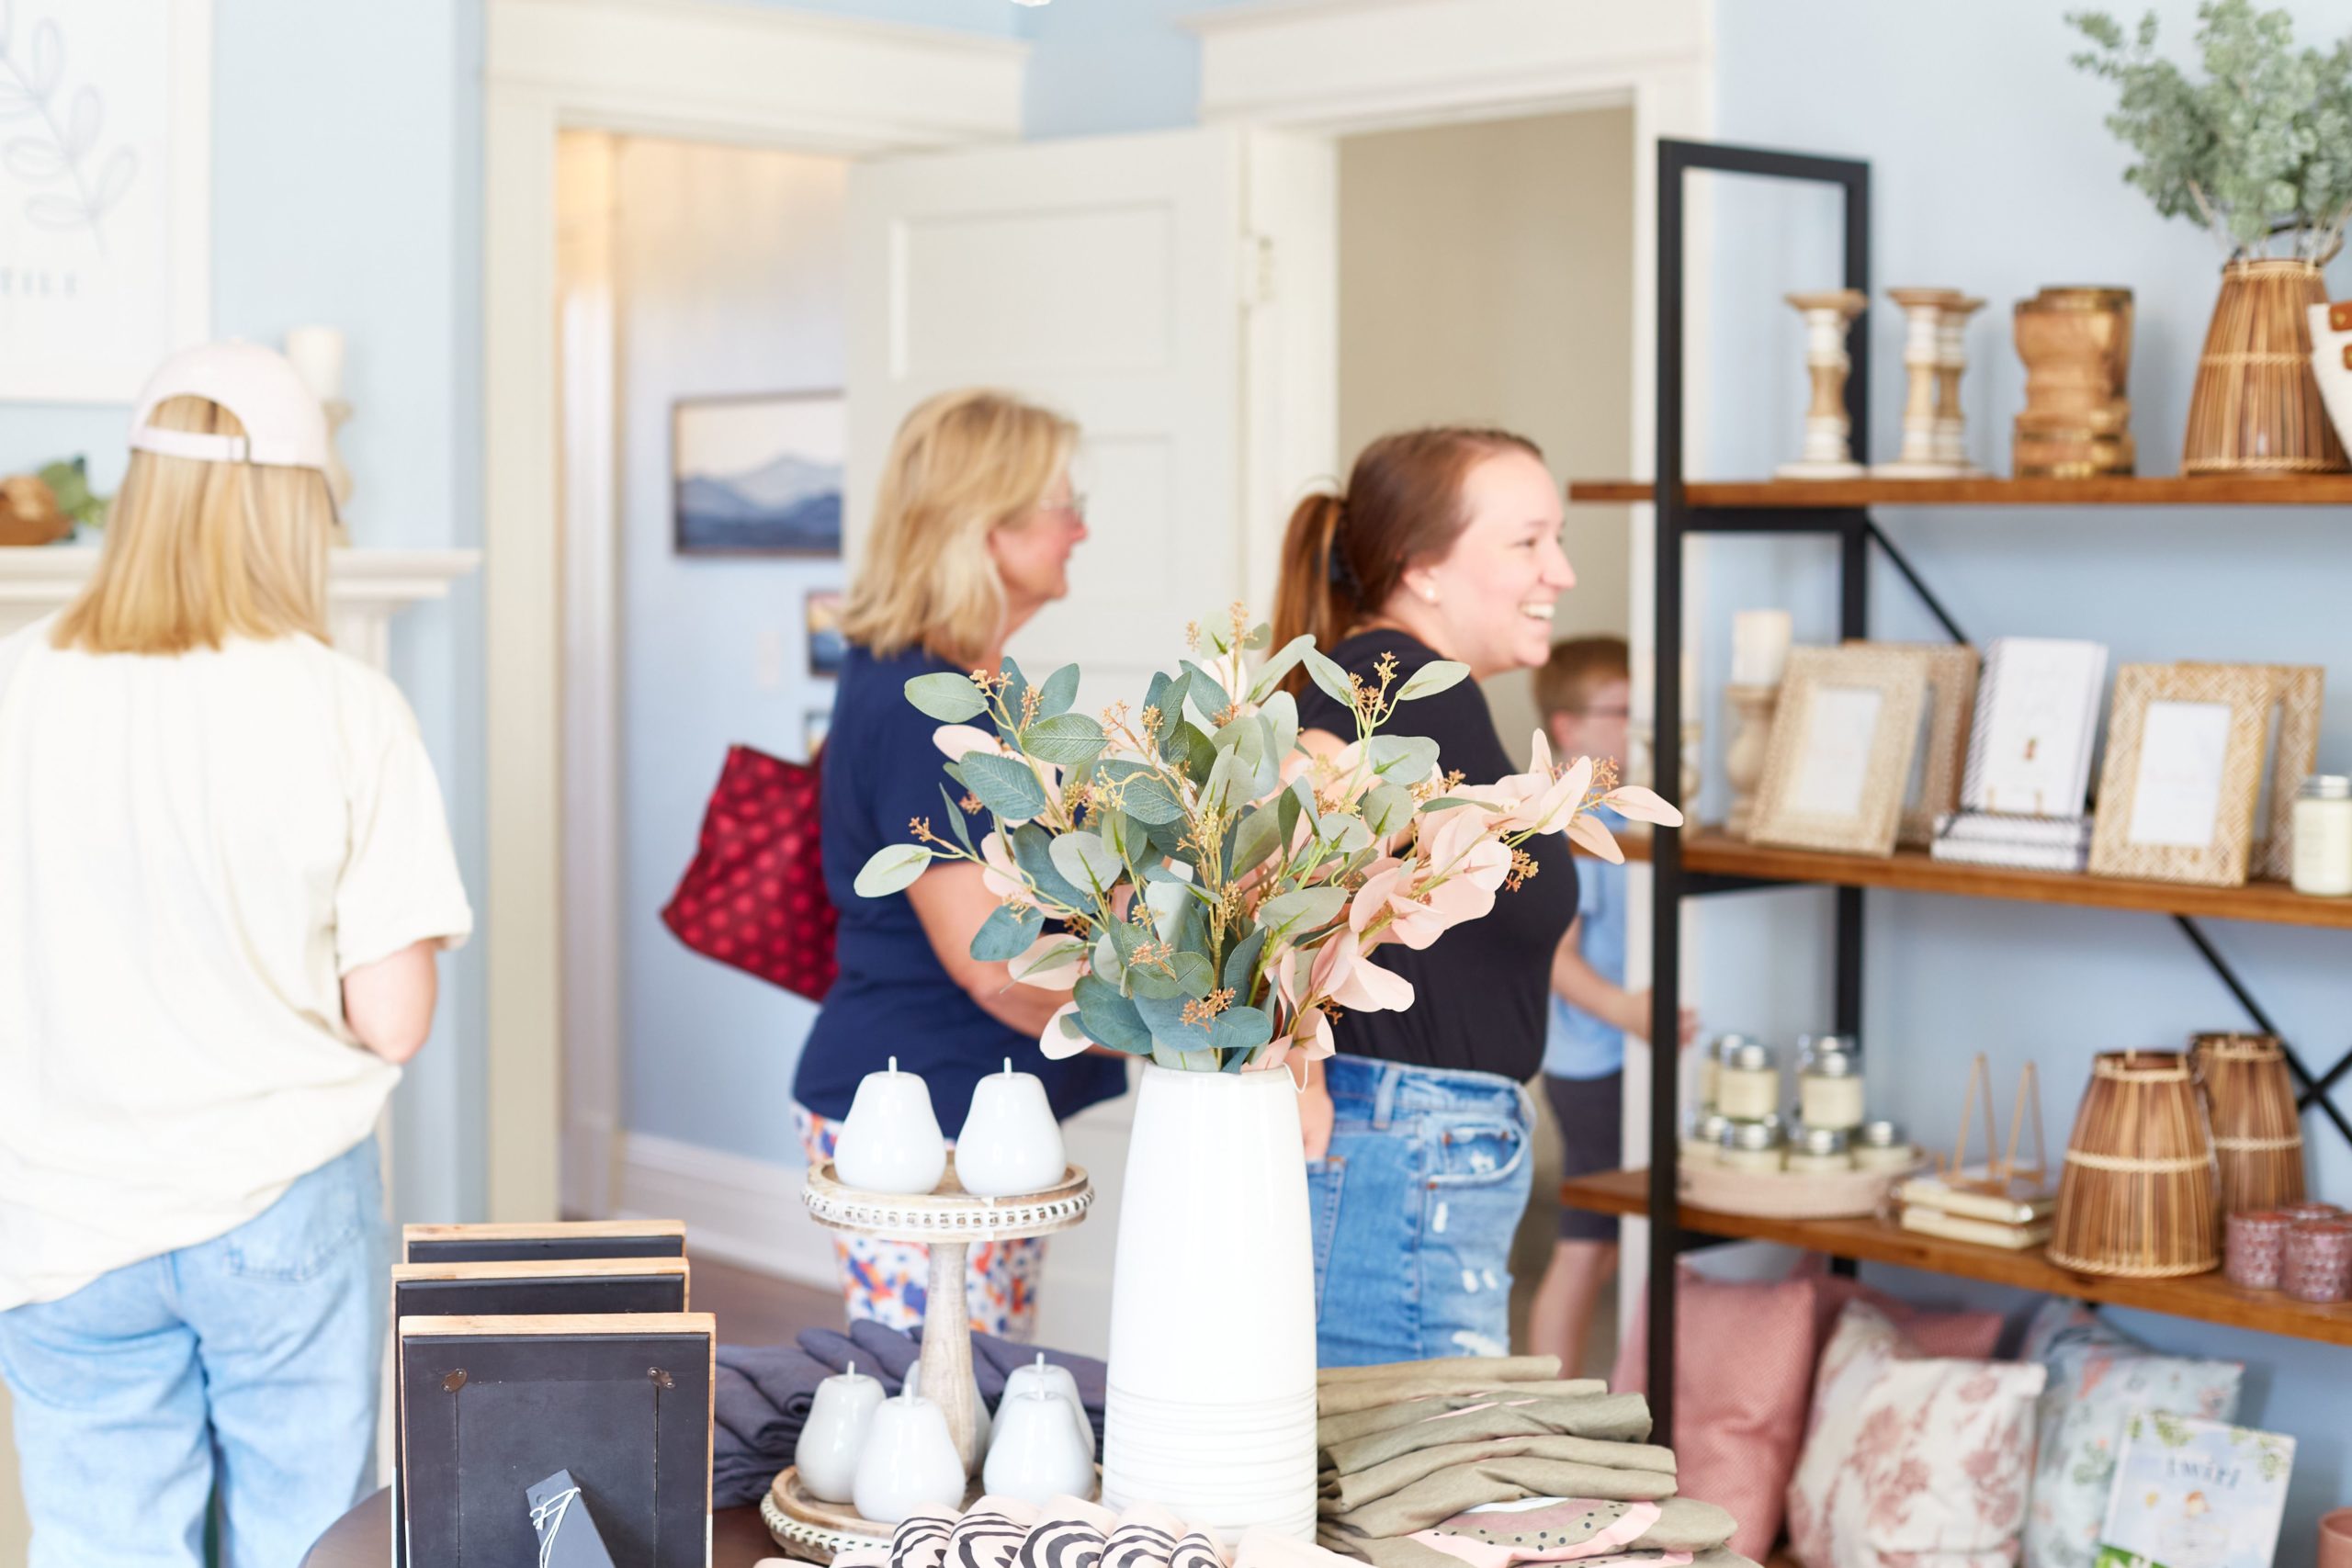 Shoppers browse in the High Point, NC home goods store, The Mantel Mercantile.